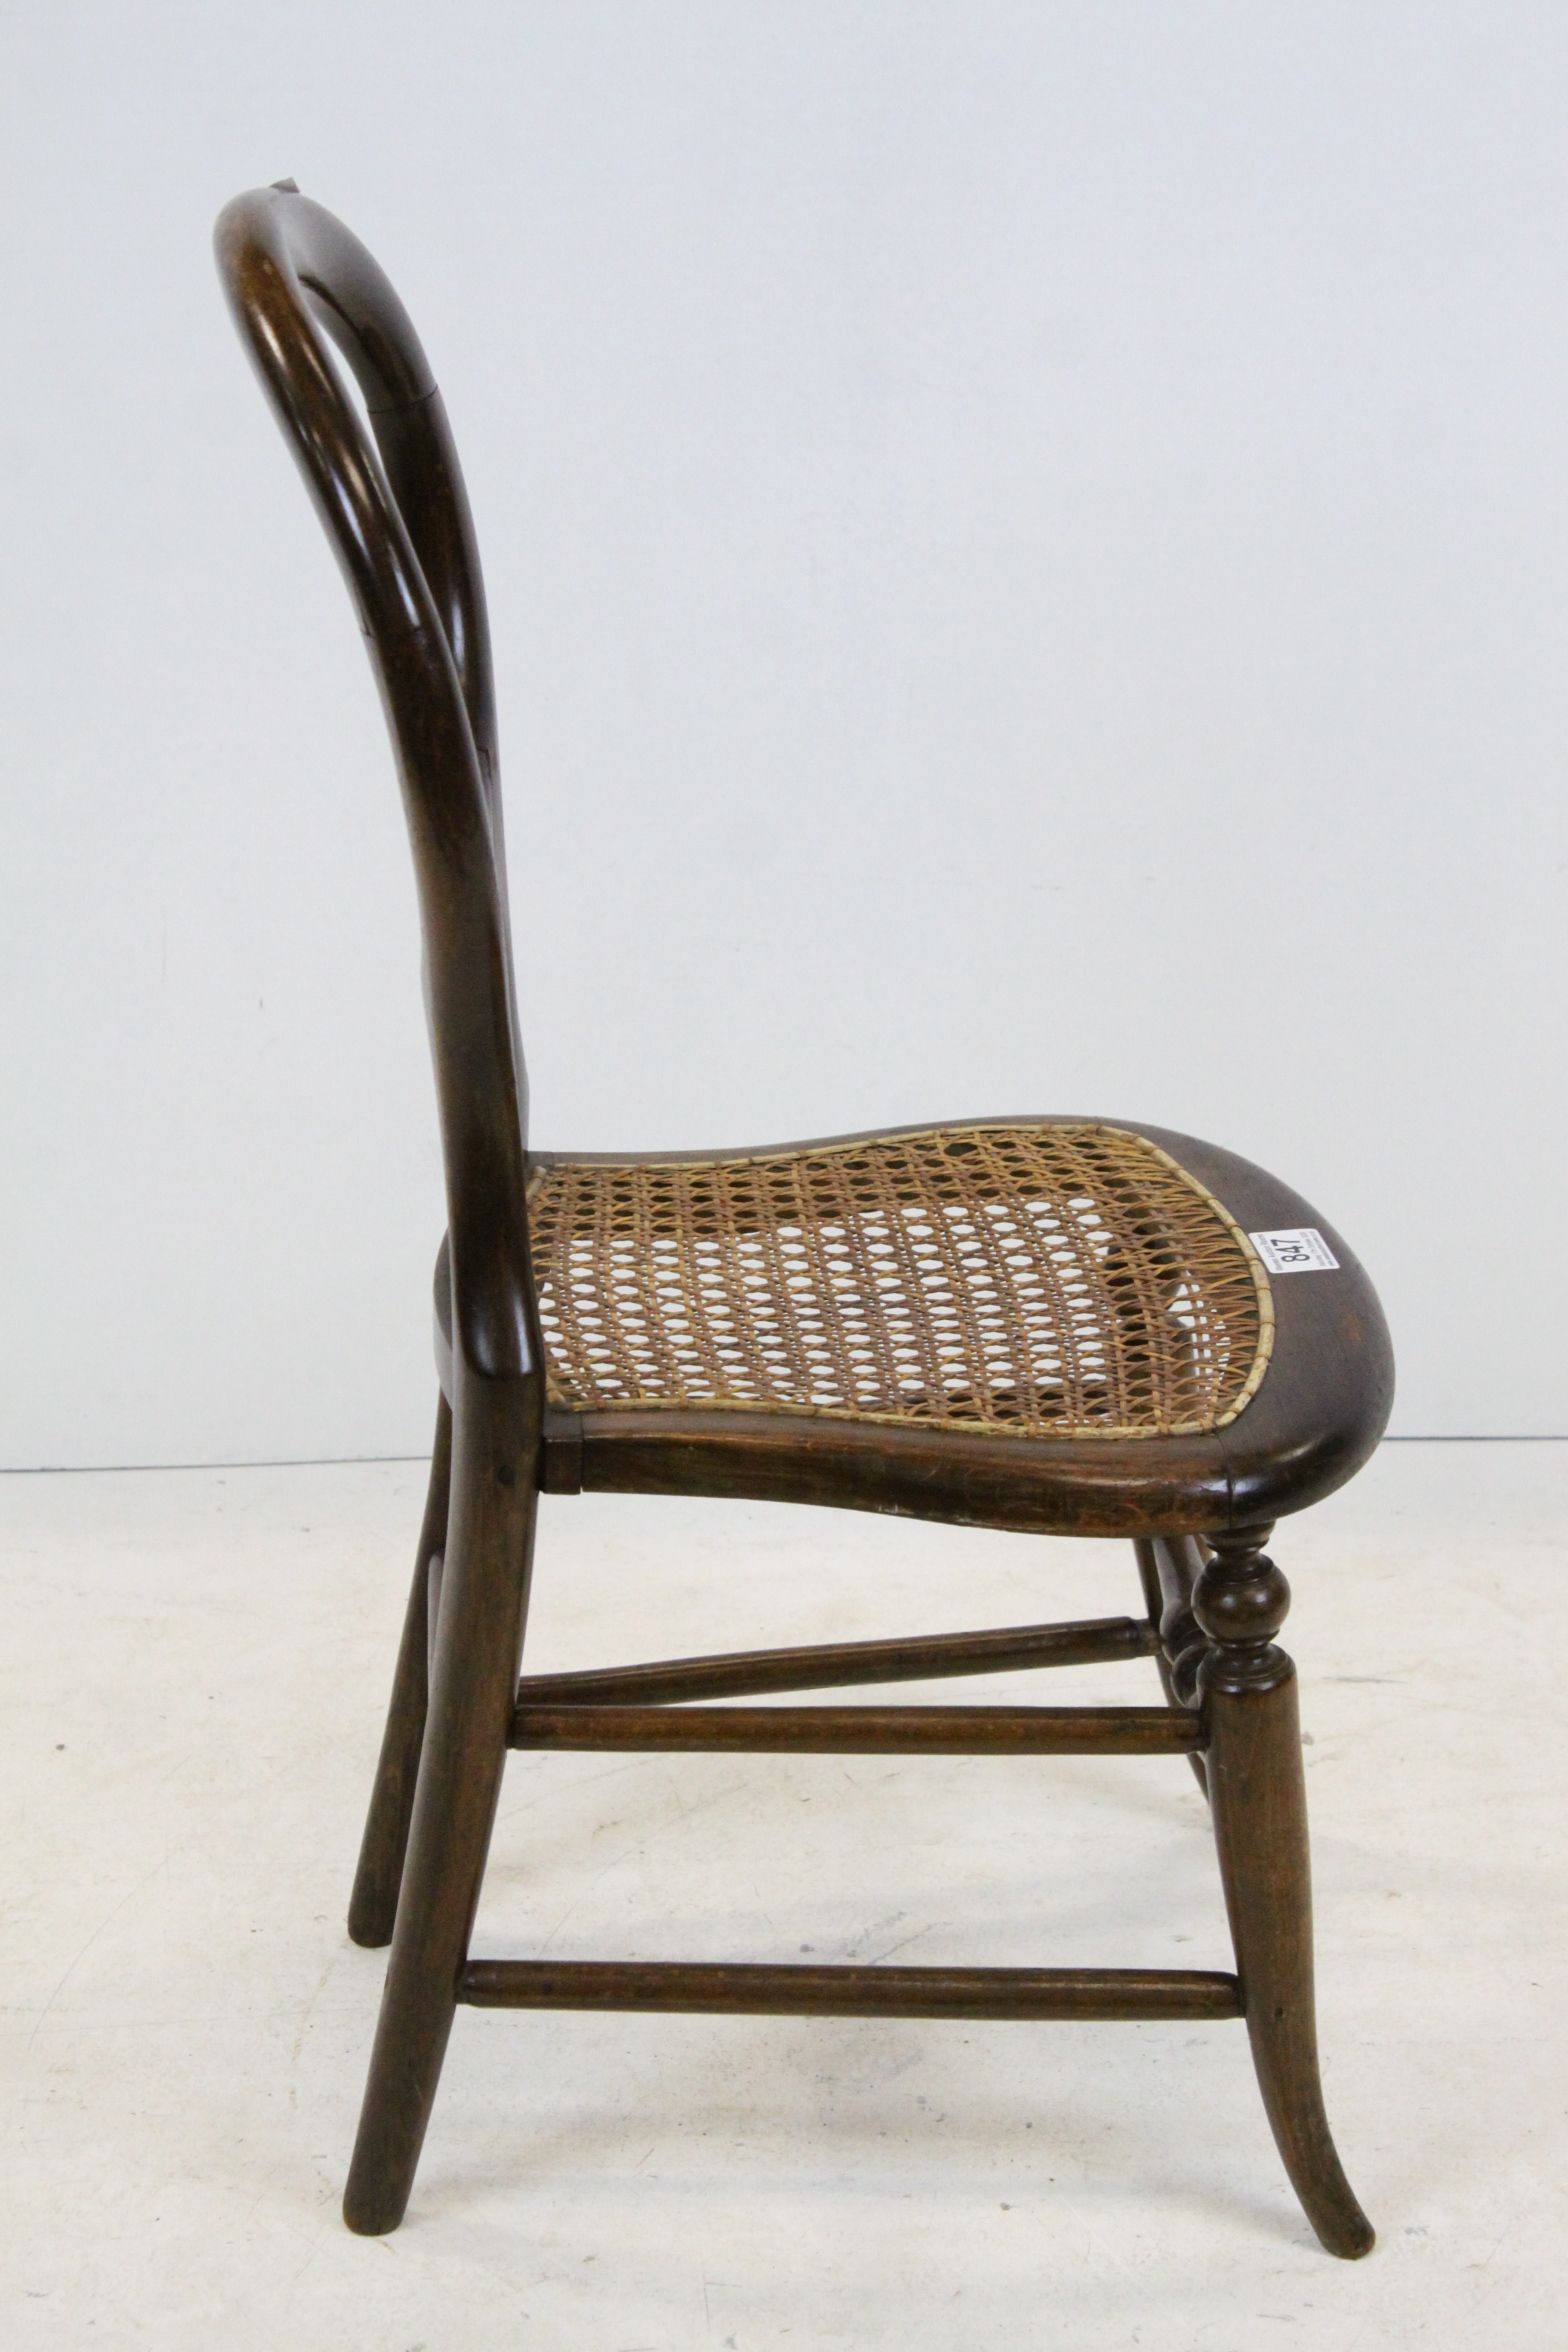 Victorian Balloon Back Child's Chair with rattan seat, 70cms high - Image 3 of 4